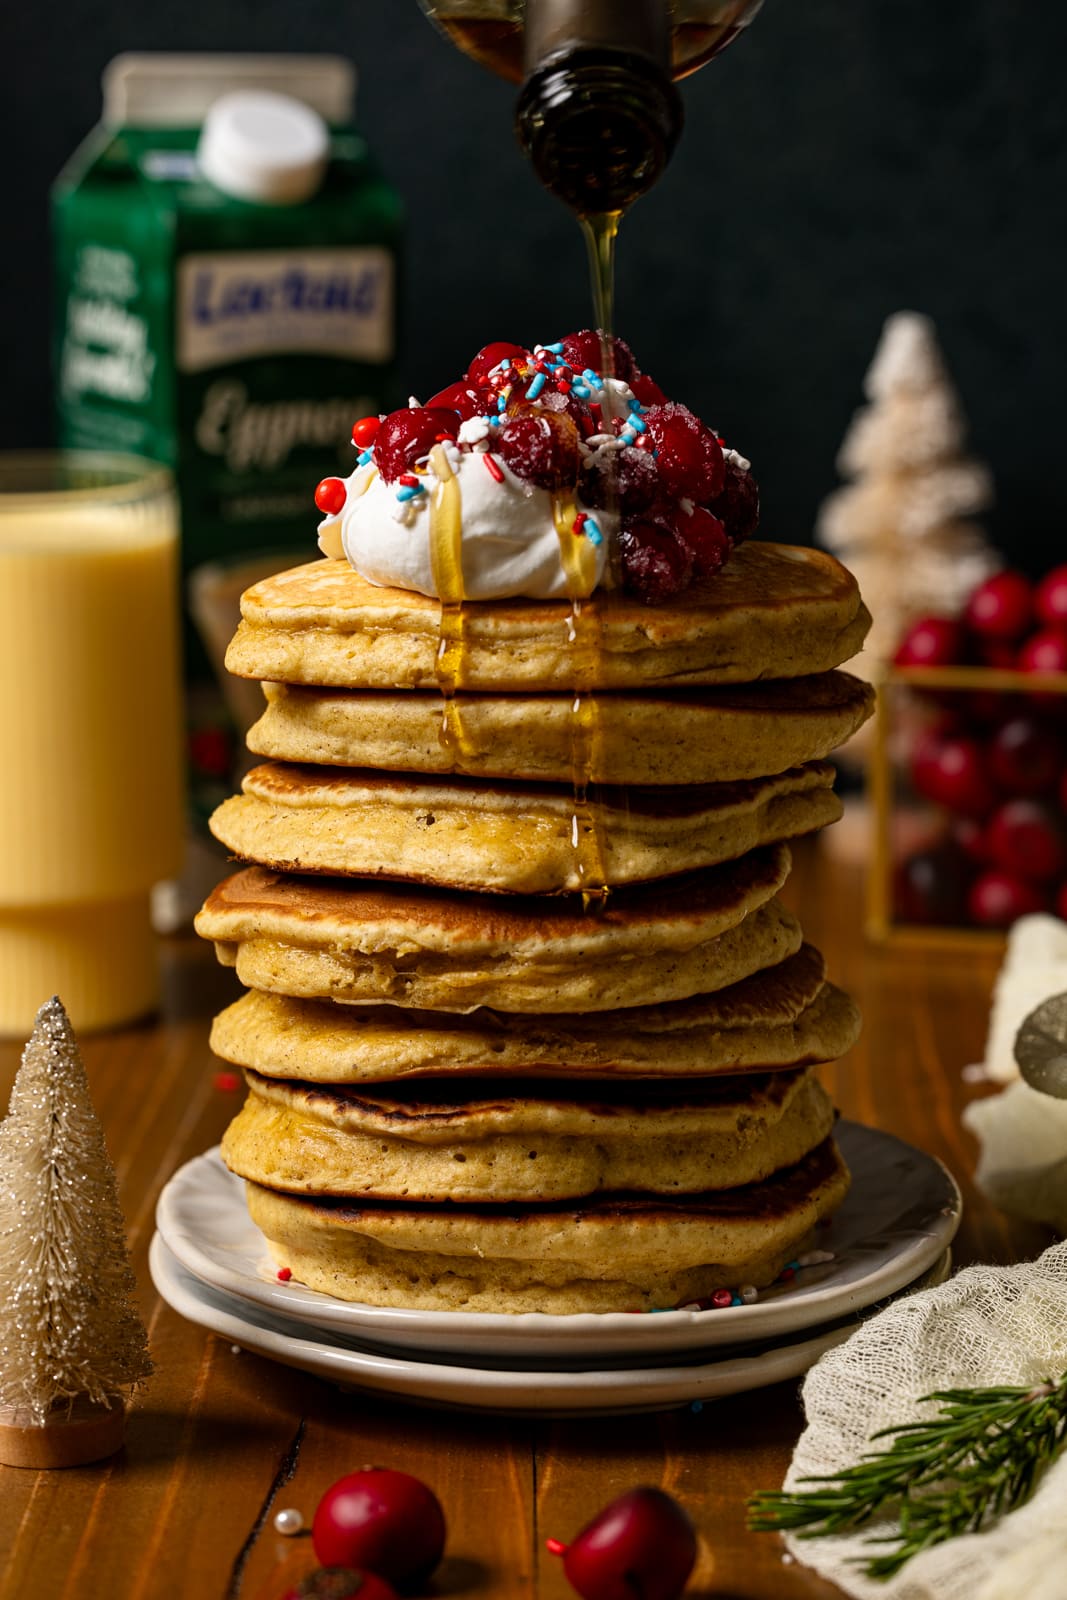 Pancakes with syrup and eggnog in background.